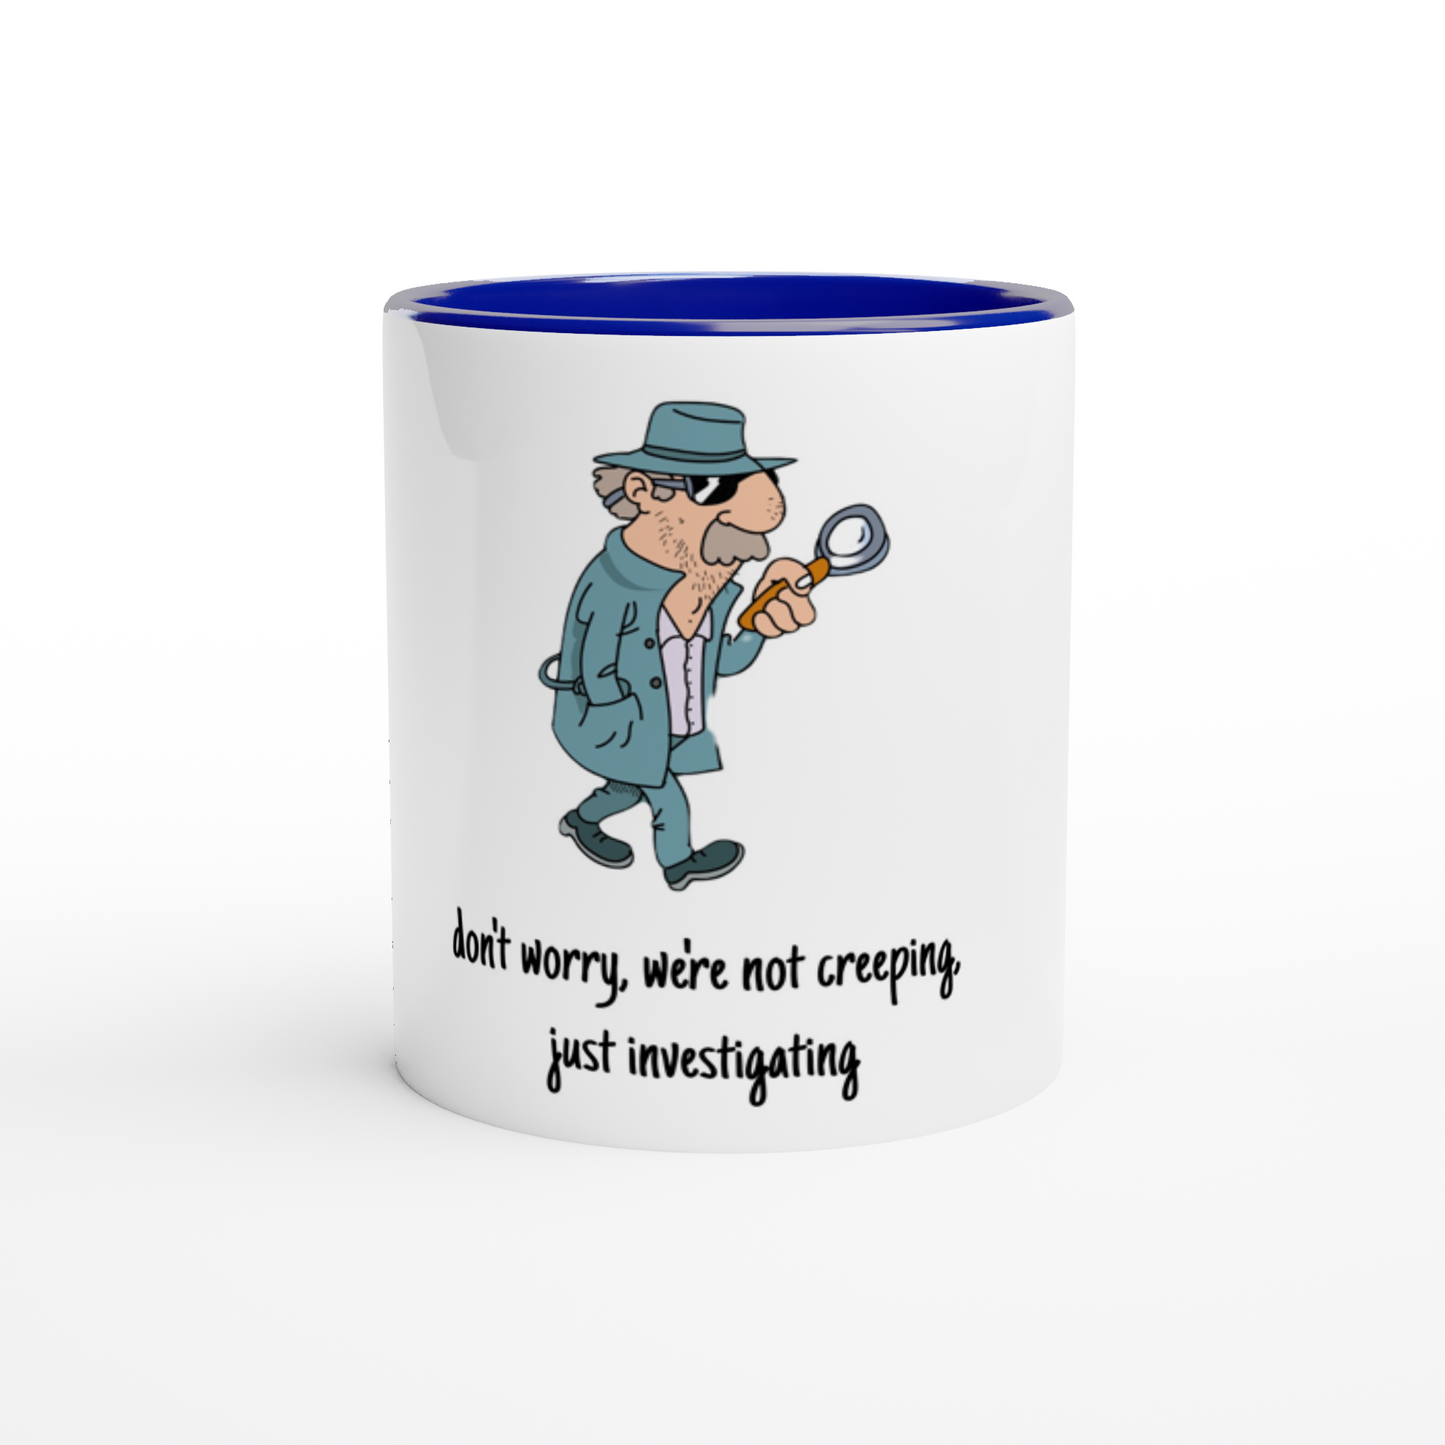 White 11oz Ceramic Mug with Color Inside - Don't Worry, We're Not Creeping, Just Investigating